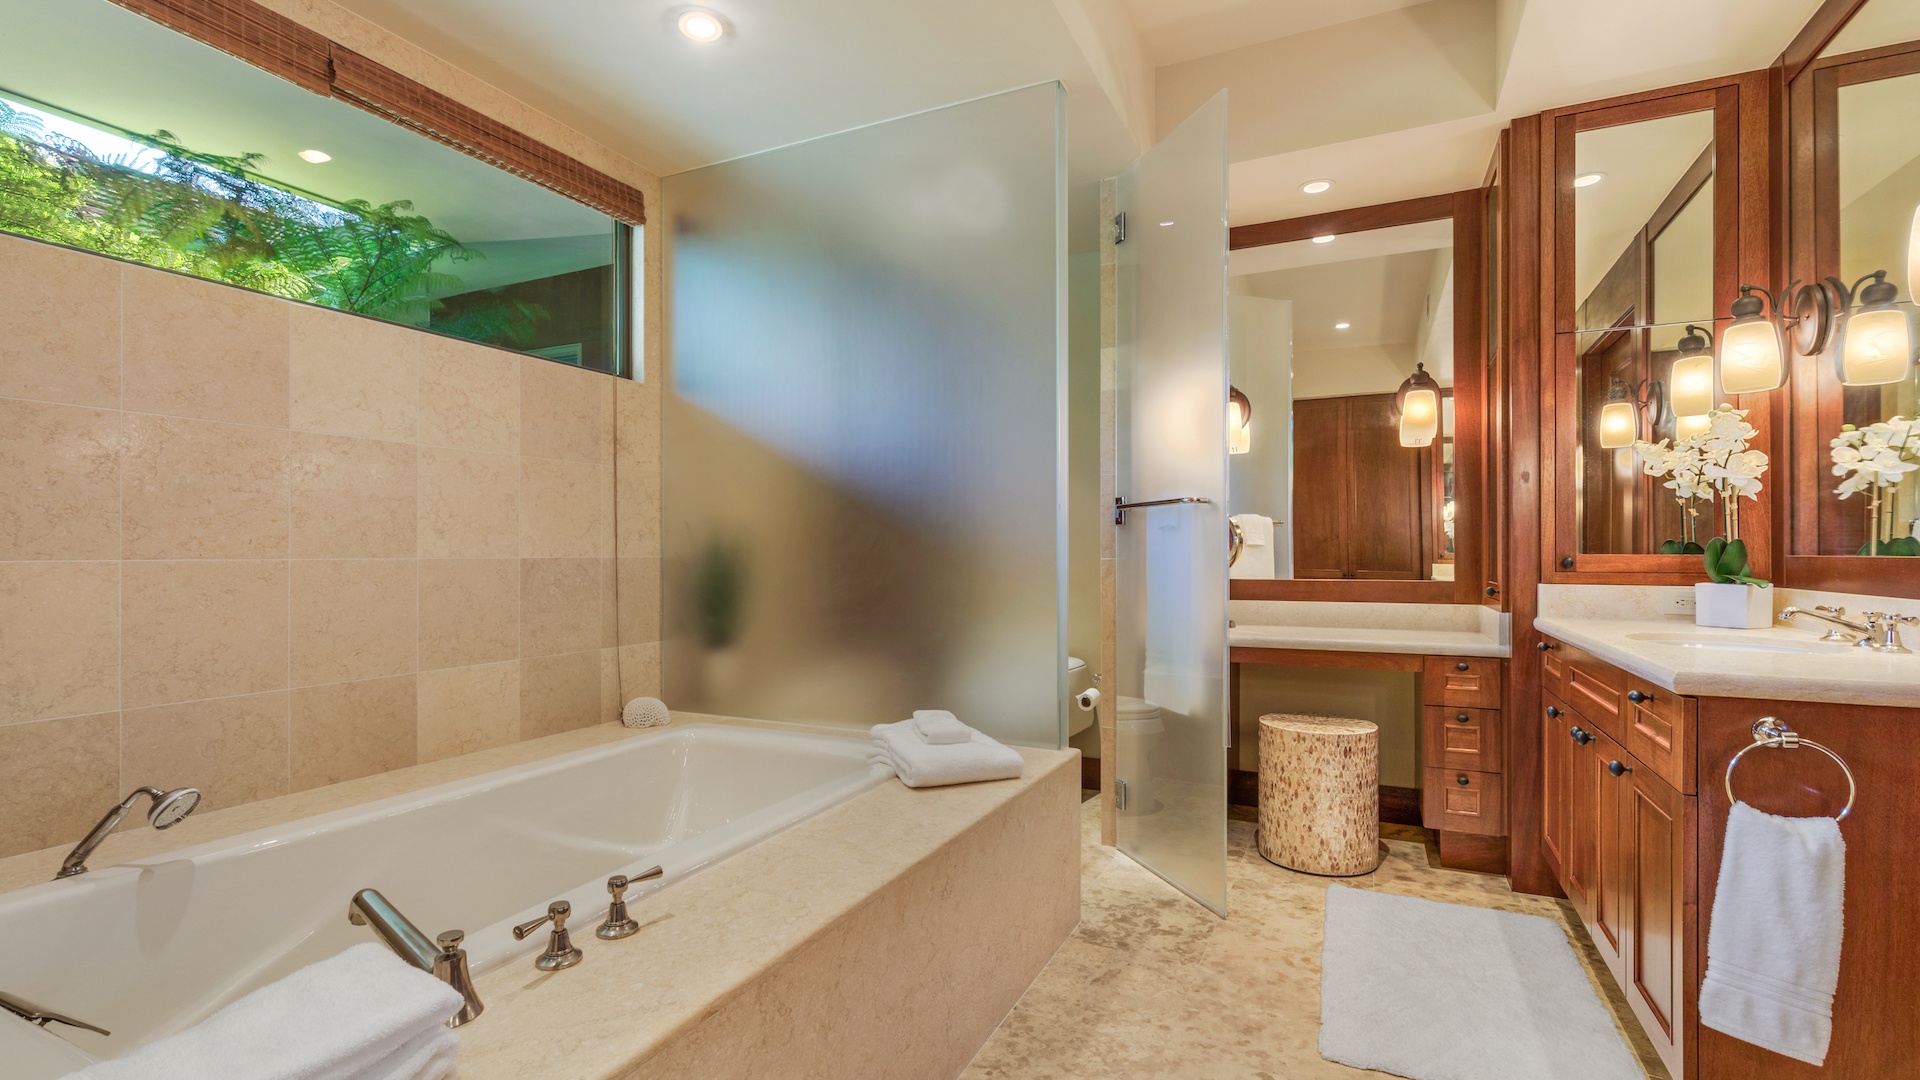 Kailua Kona Vacation Rentals, 3BD Hainoa Villa (2901D) at Four Seasons Resort at Hualalai - Primary bath with oversized soaking tub and frosted privacy glass around the commode.